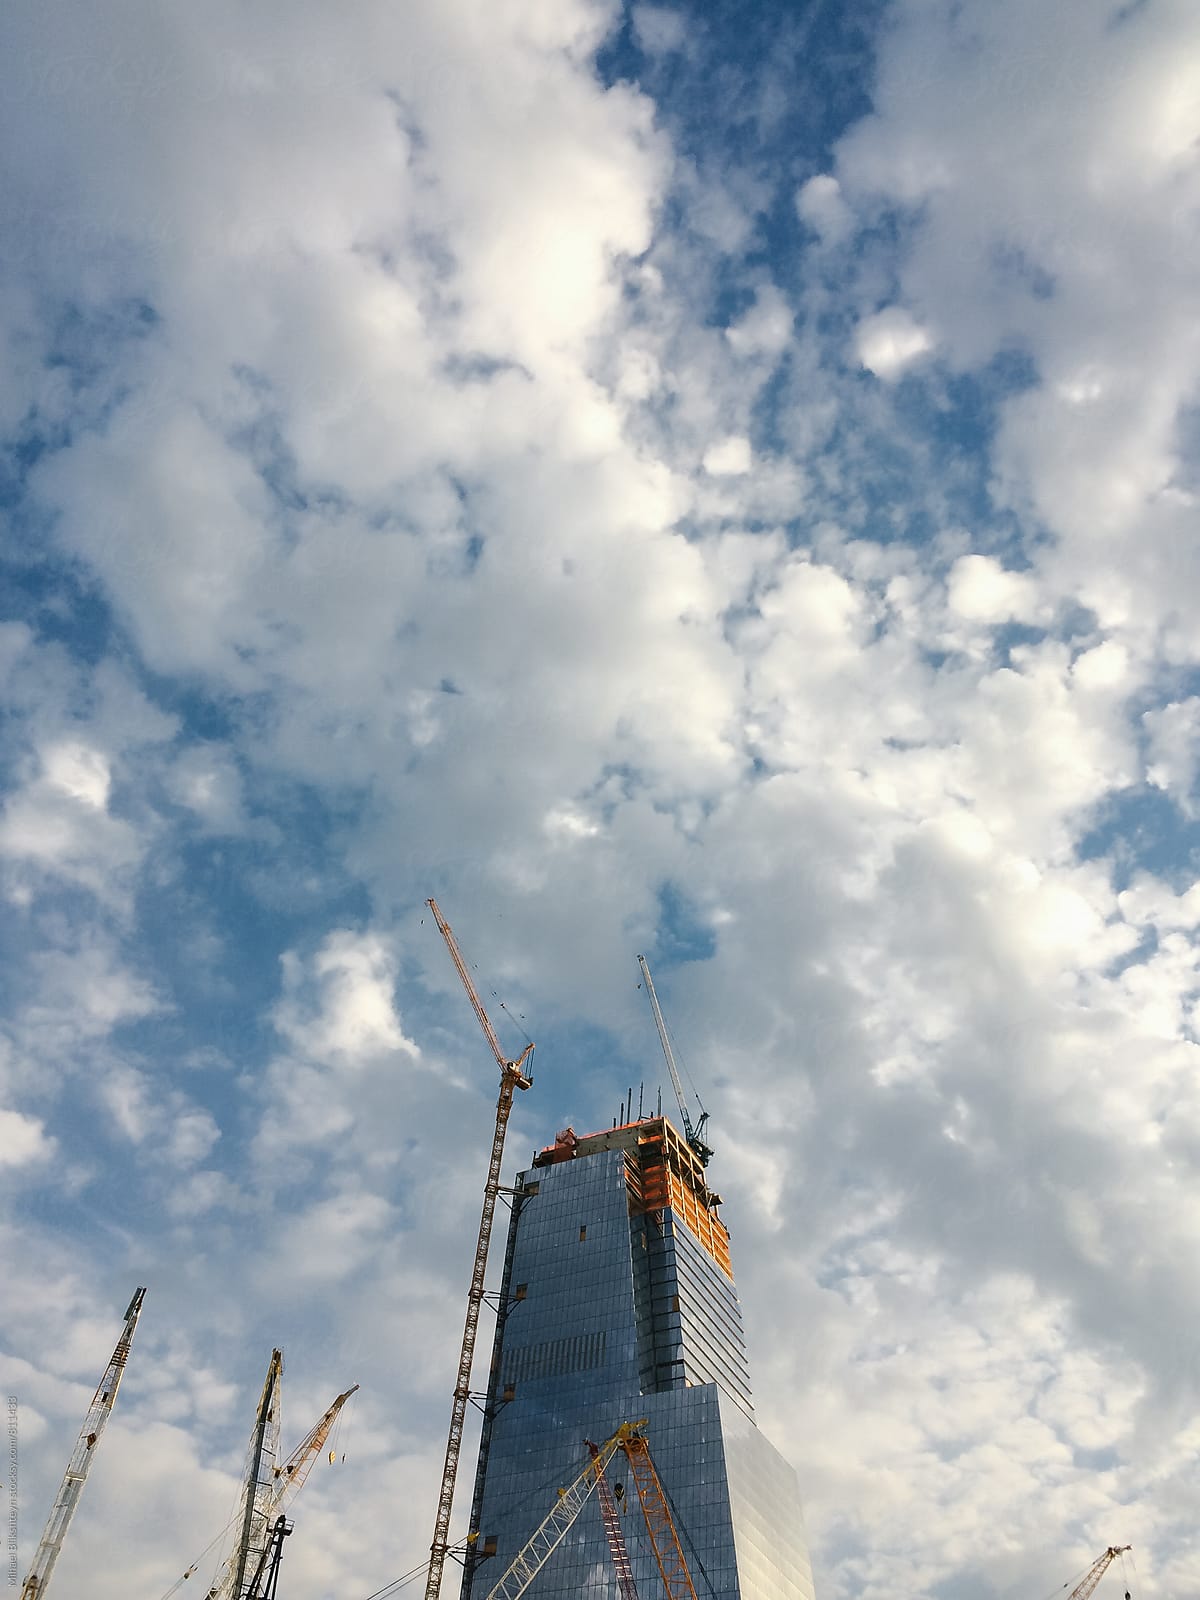 Construction of a skyscraper in a city with cranes against blue sky with clouds